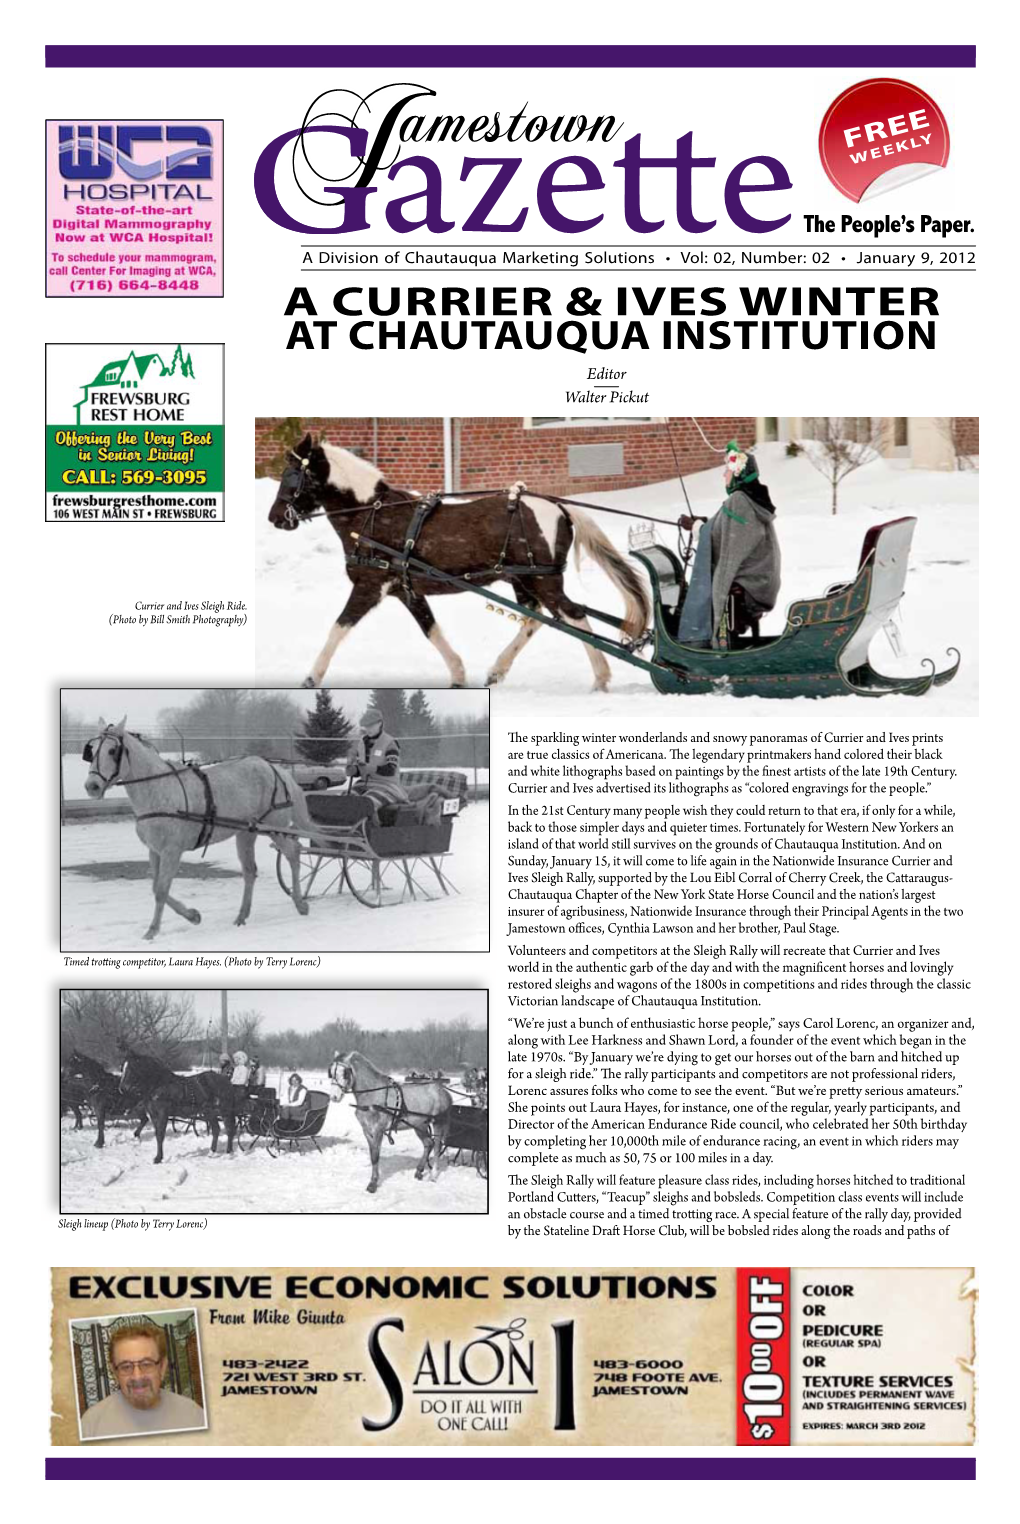 A Currier & Ives Winter at Chautauqua Institution